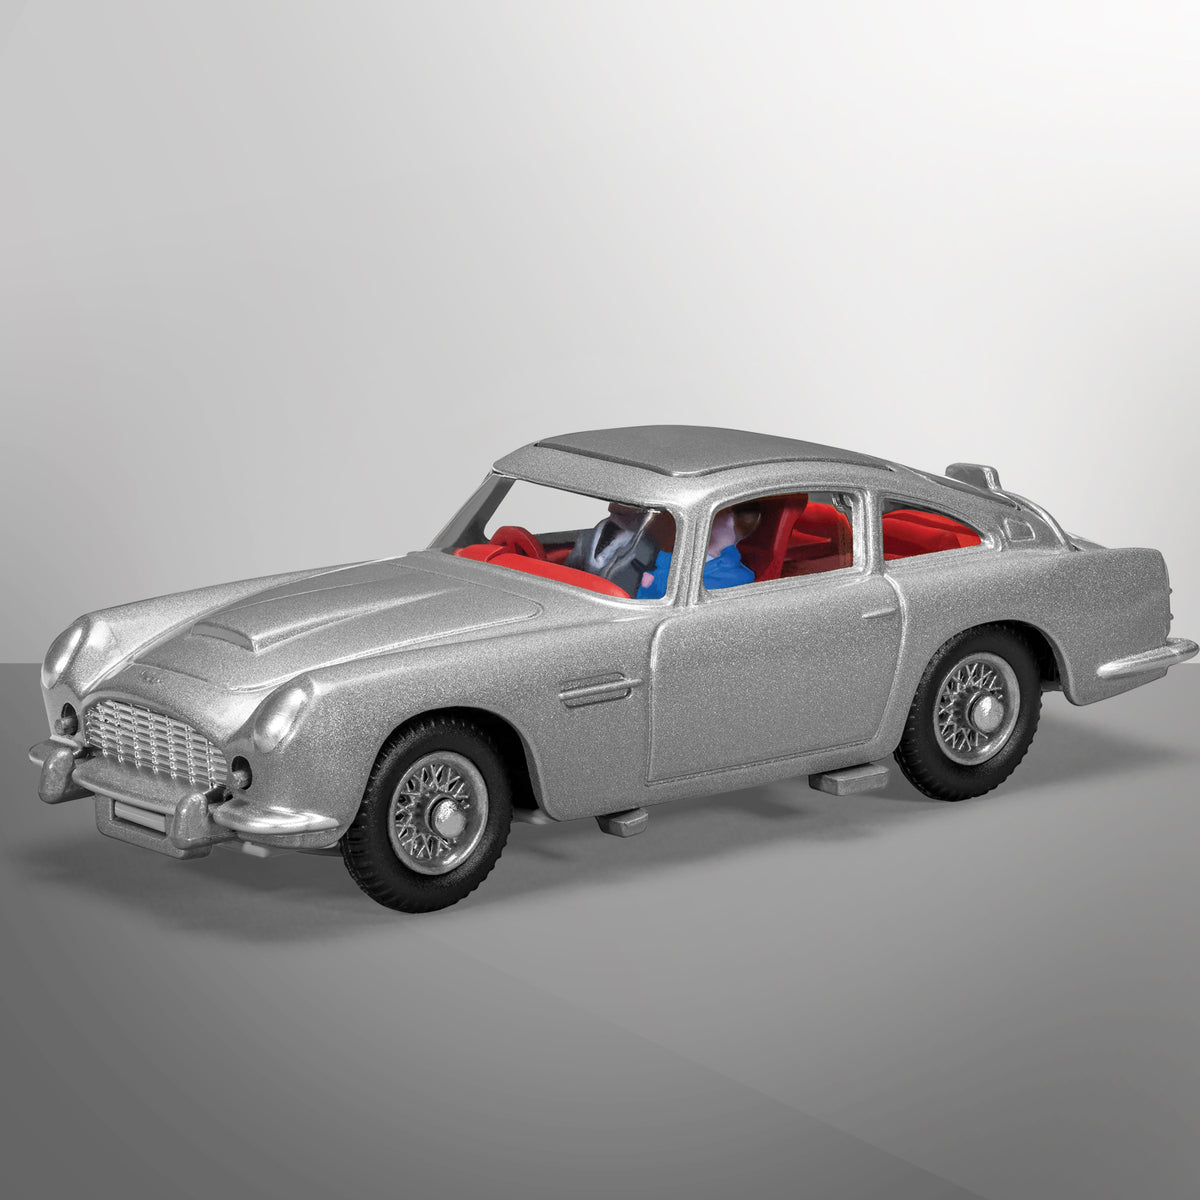 James Bond Aston Martin DB5 Model Car With Ejector Seat - Goldfinger 60th Anniversary Edition - By Corgi (Pre-order)